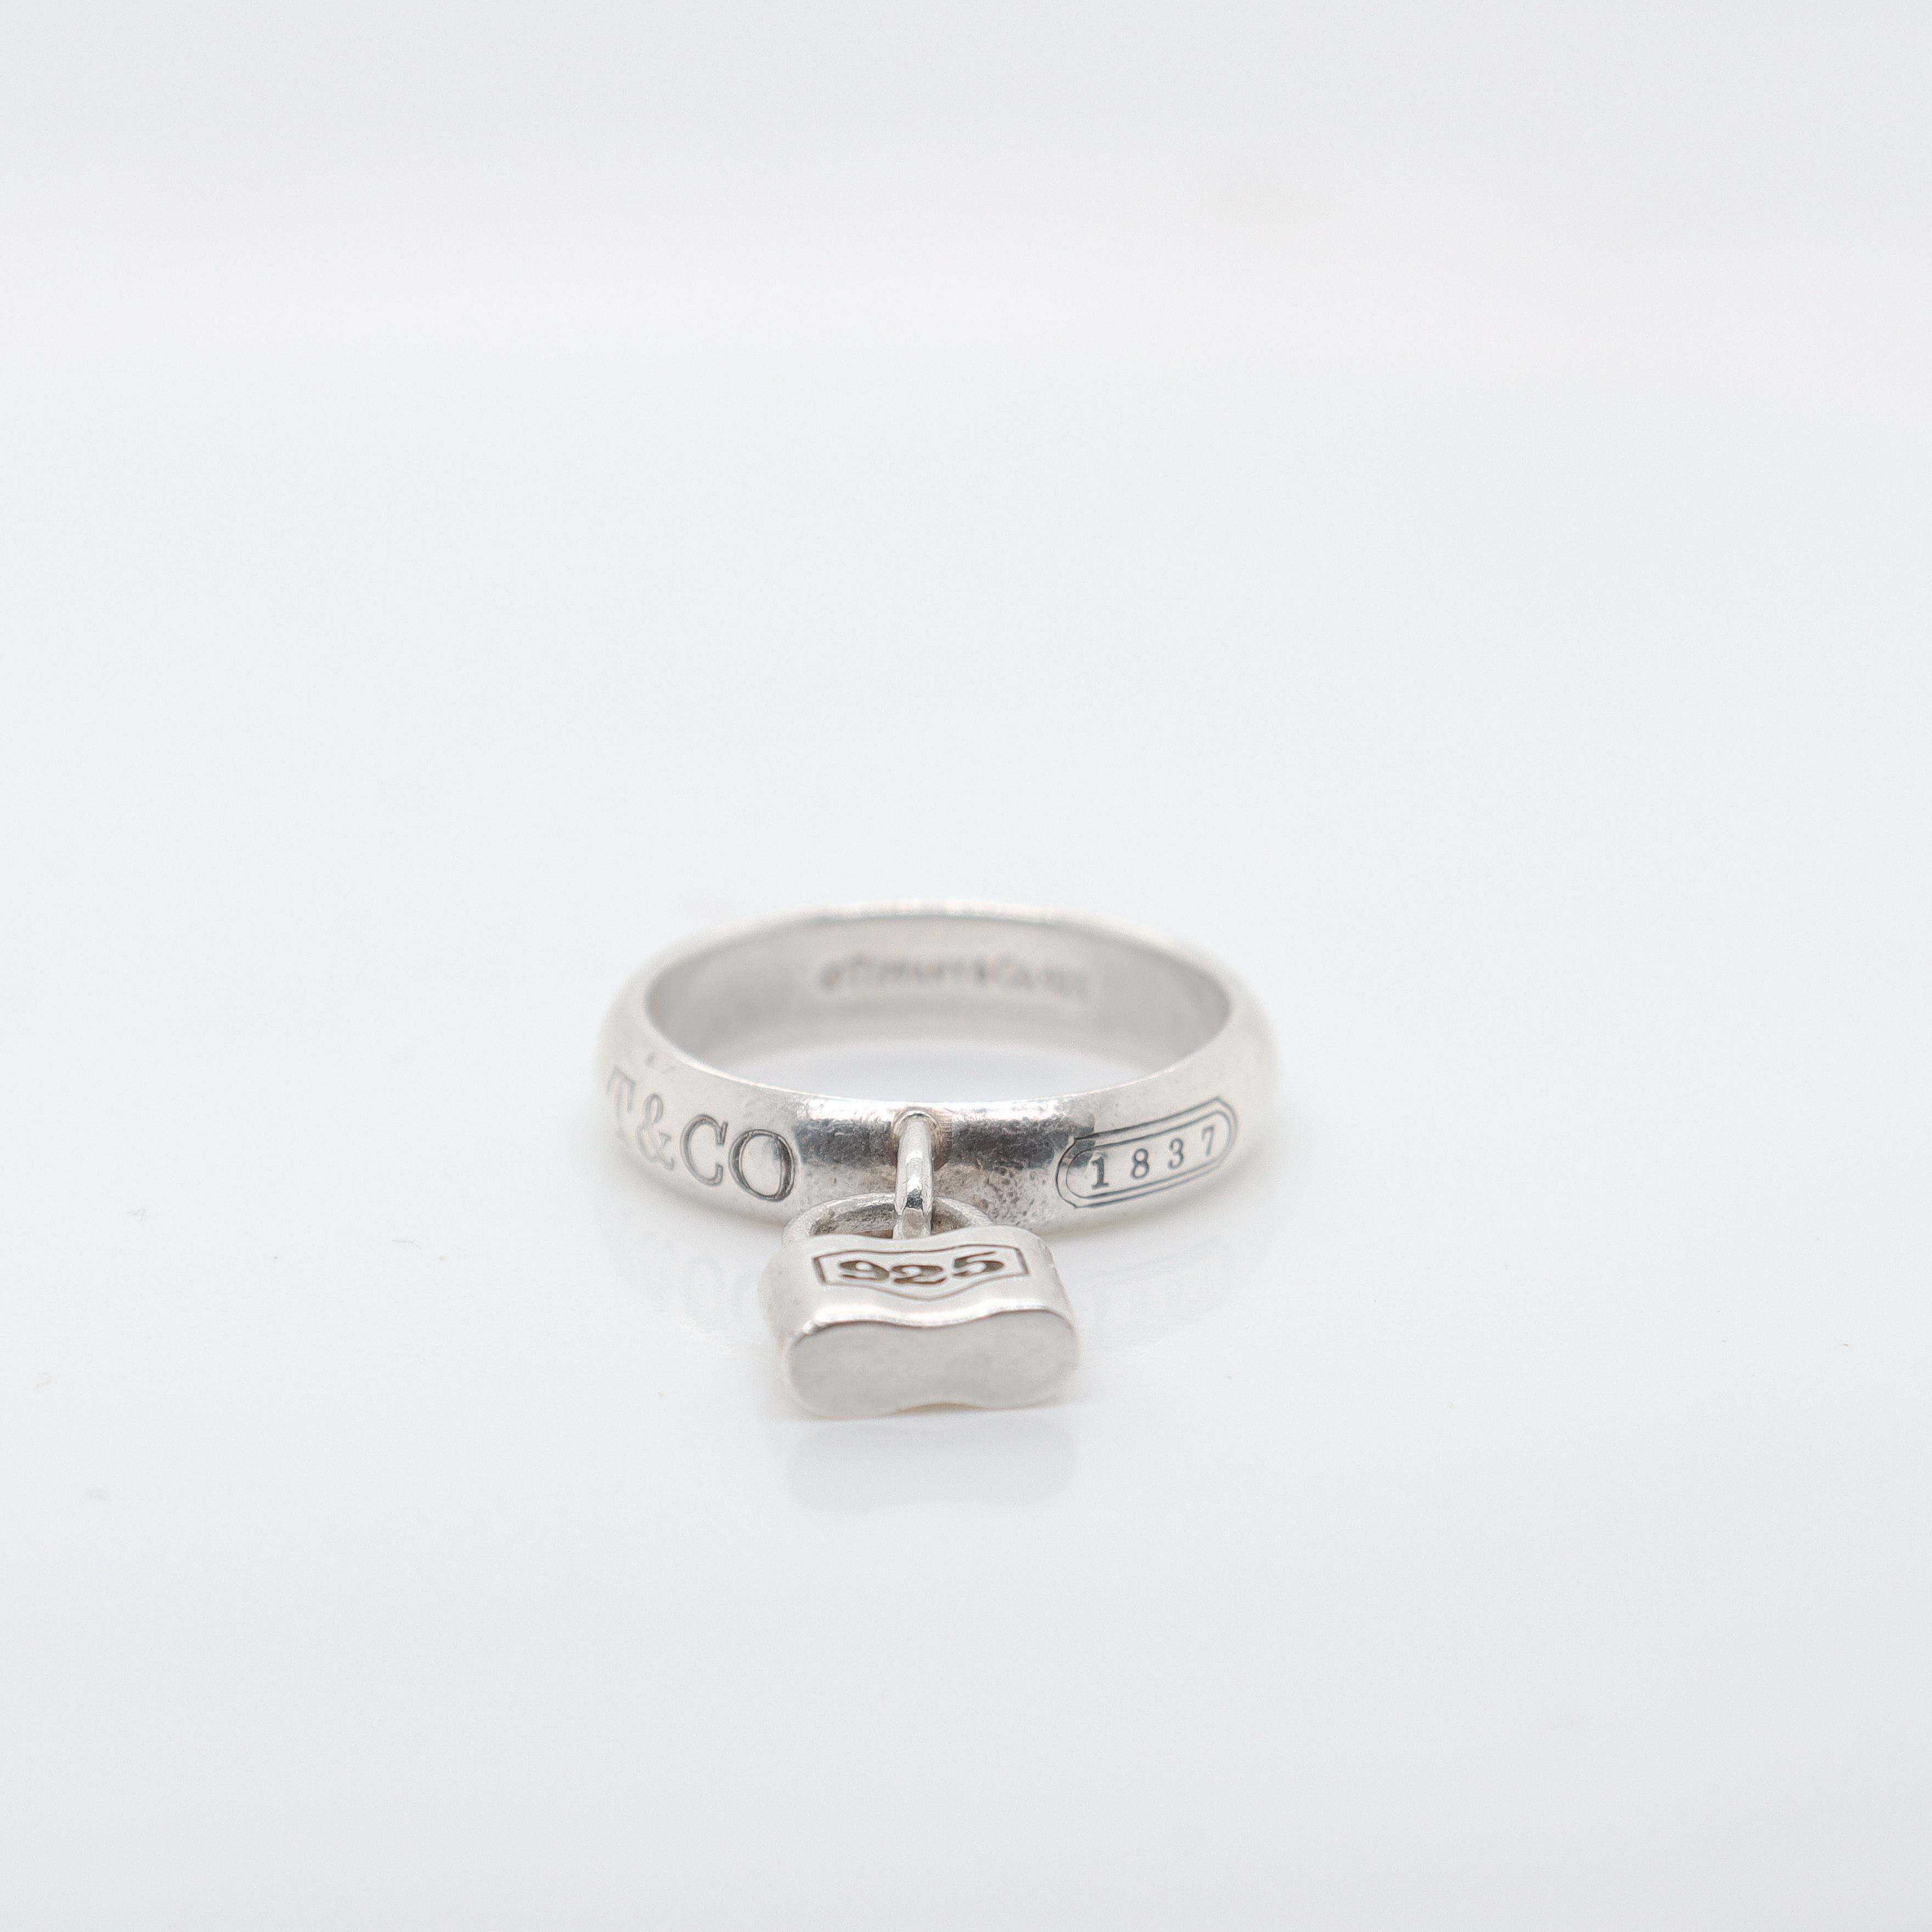 Tiffany & Co Sterling Silver 1837 Lock Charm Band Ring 6